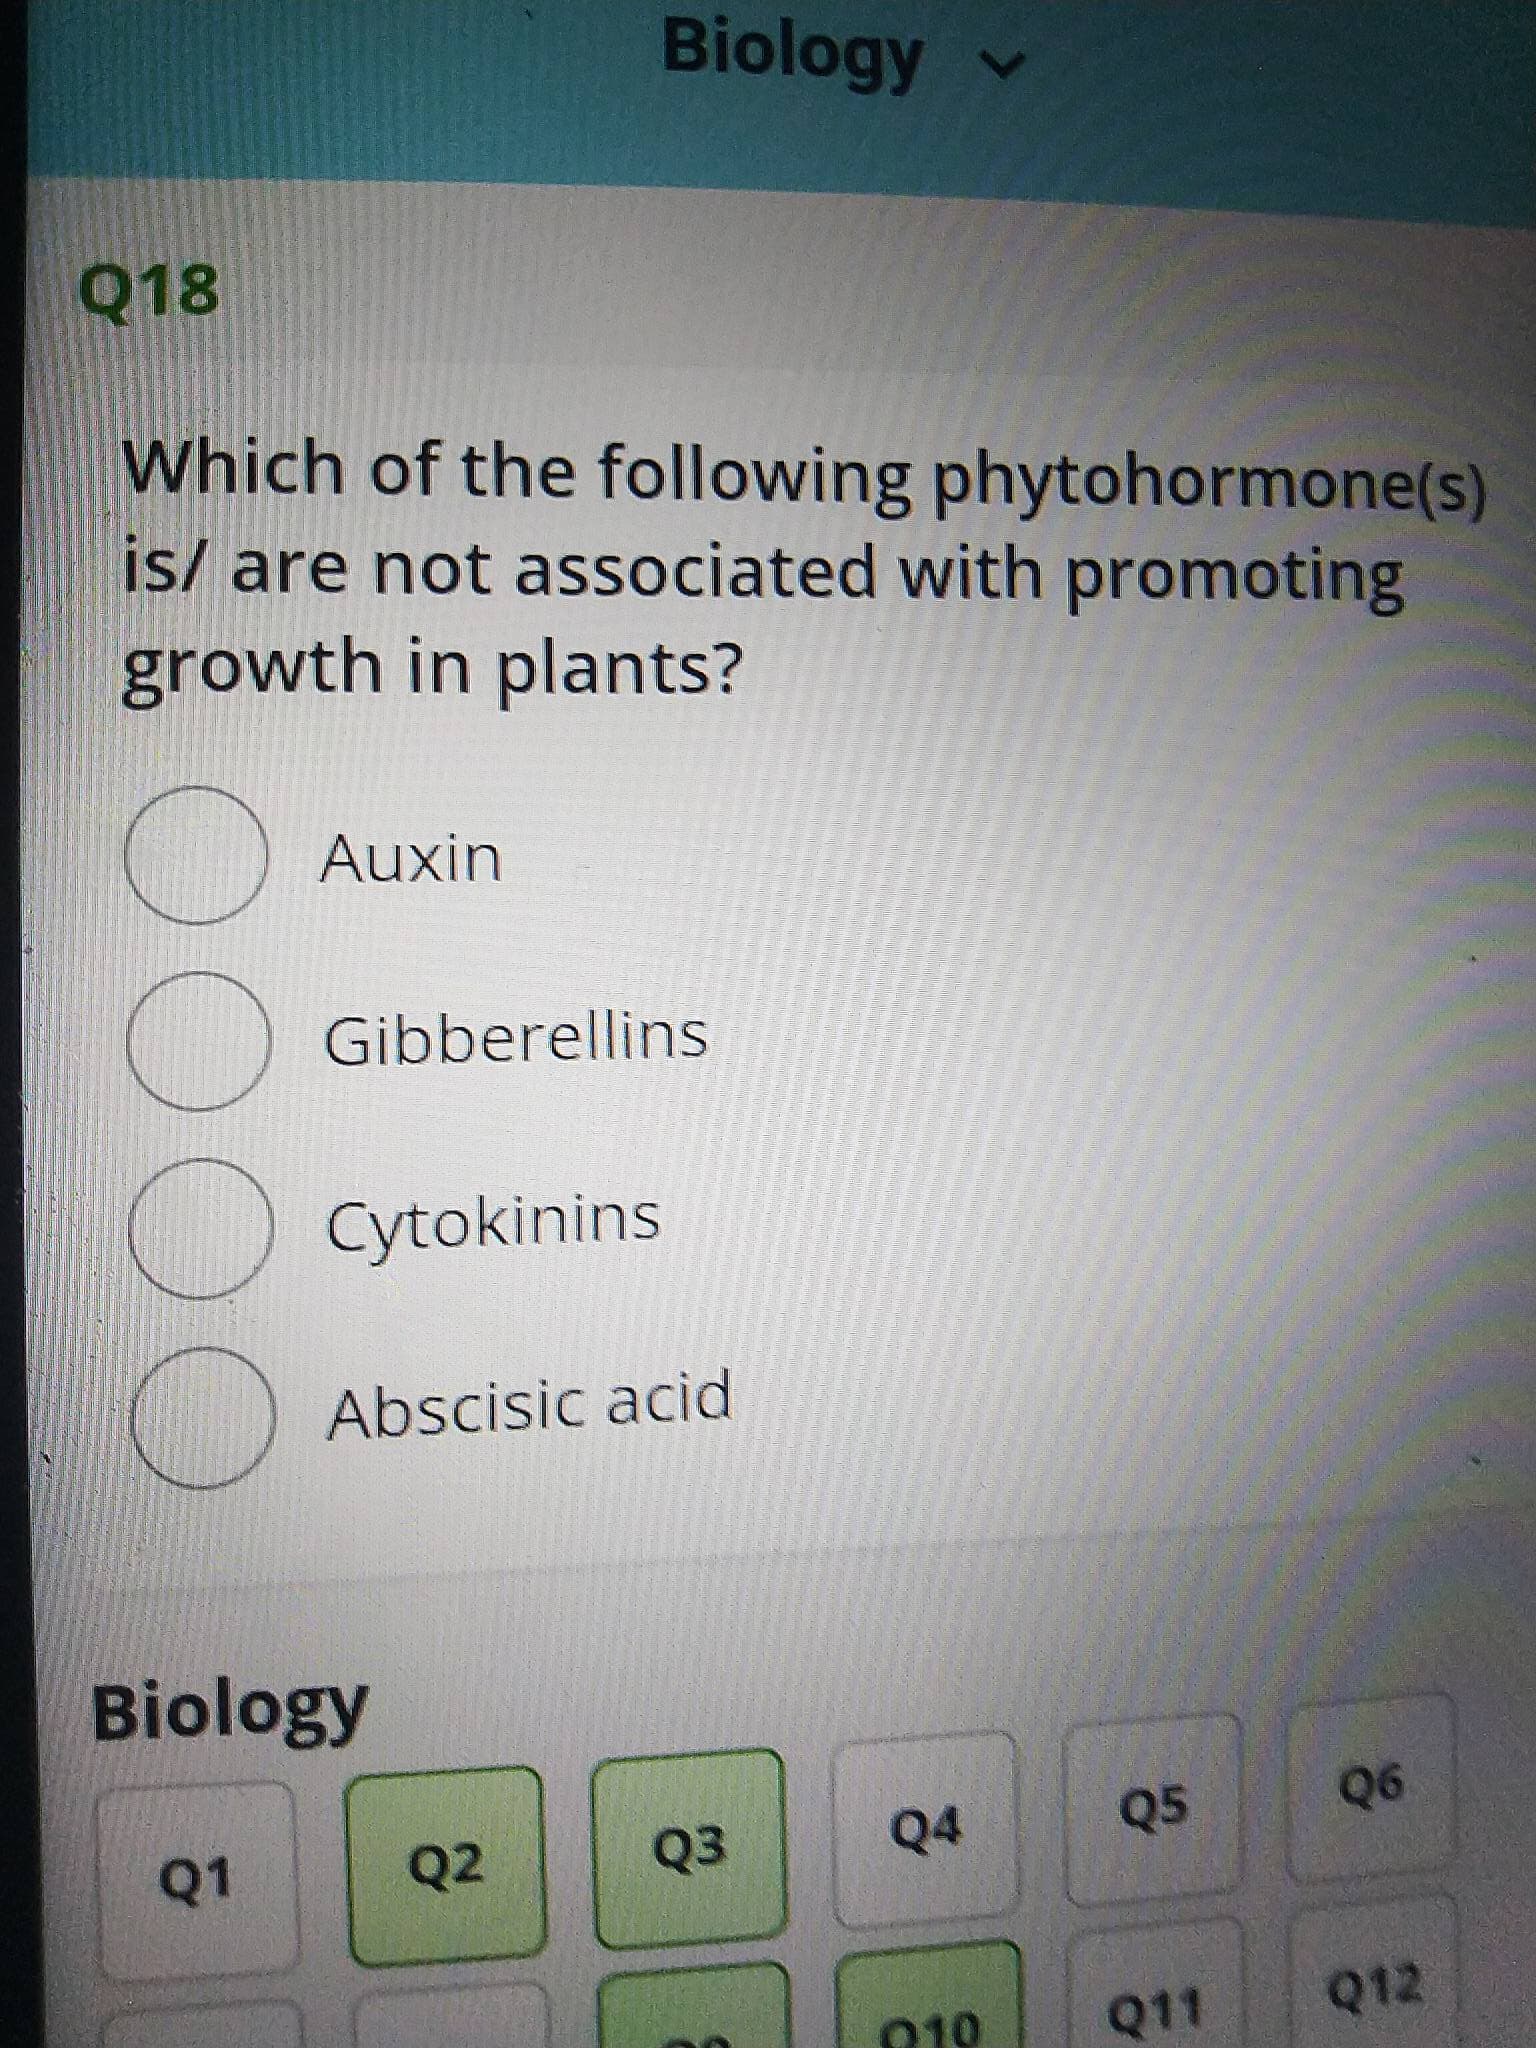 000O
Biology
> AB이08
Q18
Which of the following phytohormone(s)
is/ are not associated with promoting
growth in plants?
Auxin
Gibberellins
Cytokinins
Abscisic acid
Biology
Q4
Q5
90
Q2
Q3
019
Q11
